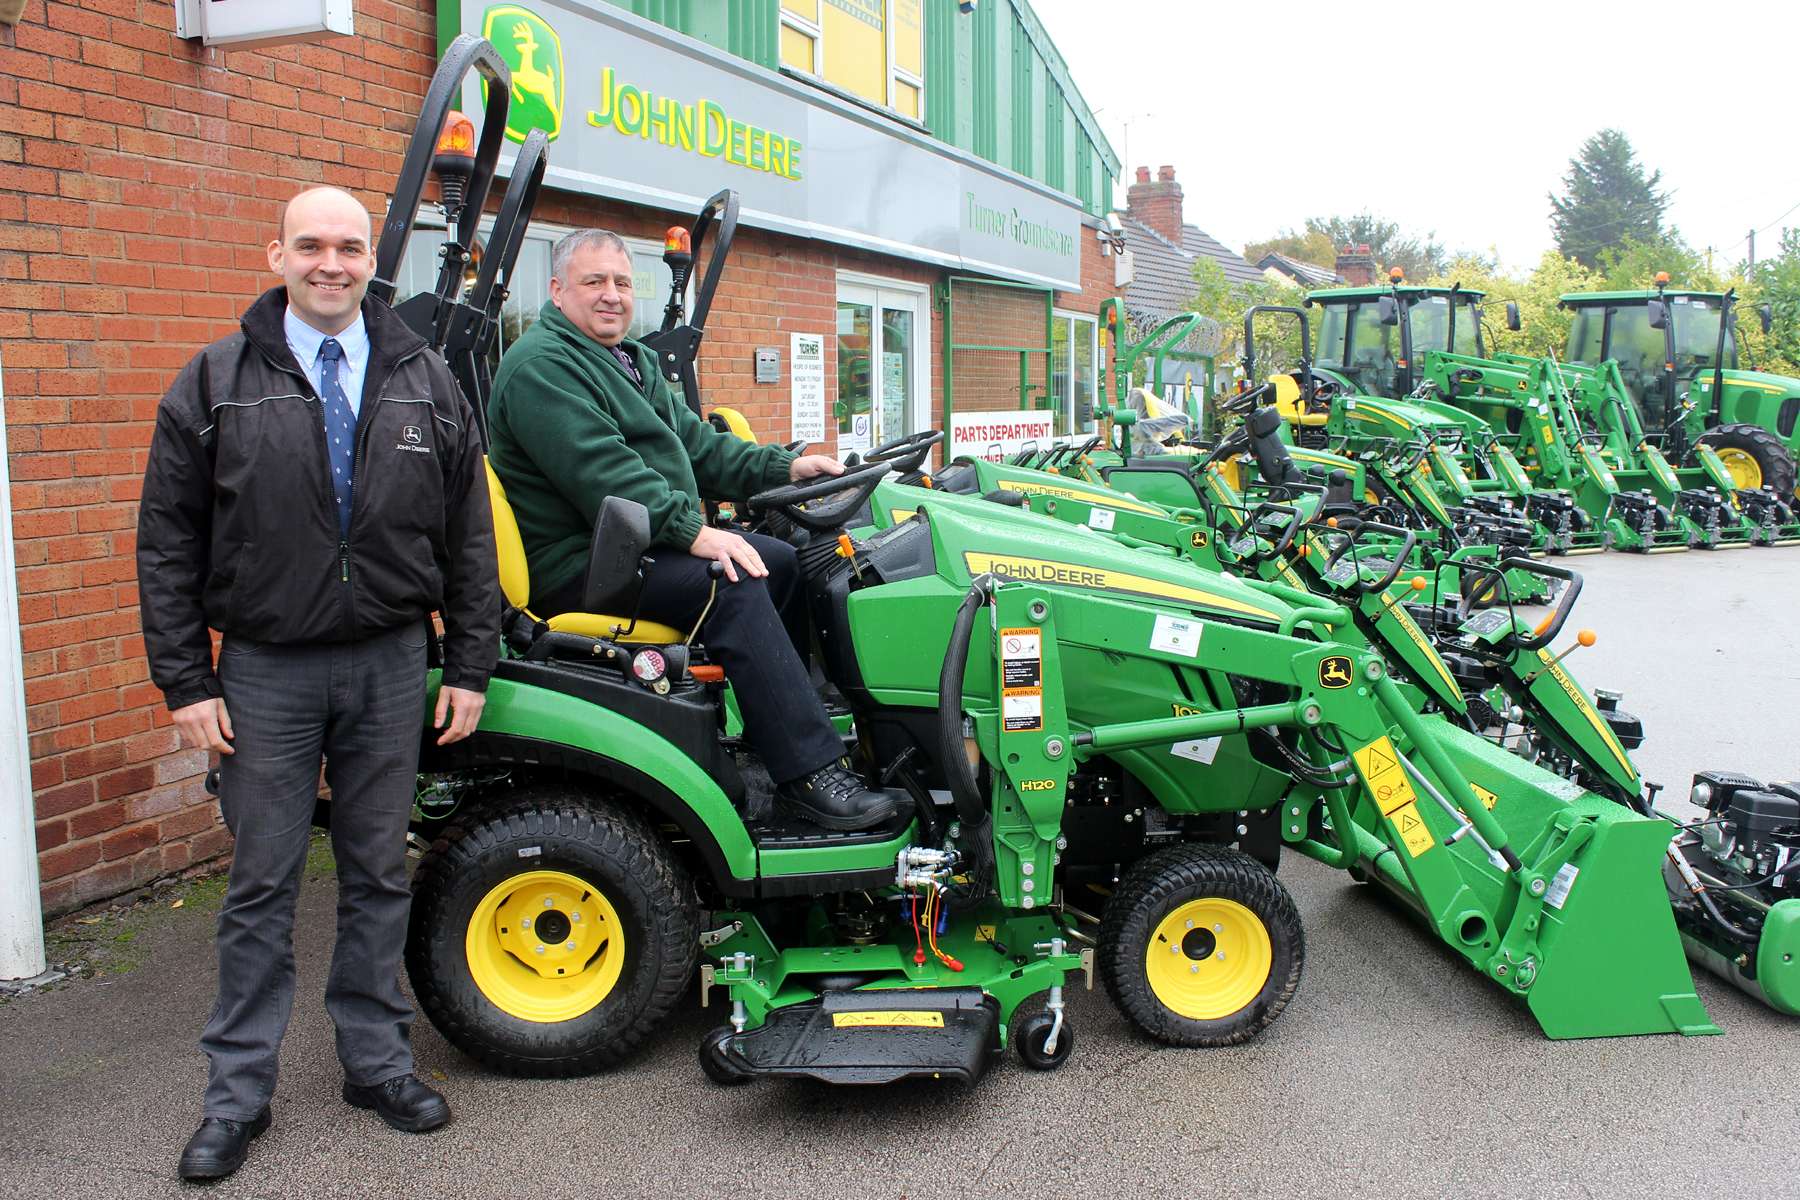 The Wirral way is with John Deere